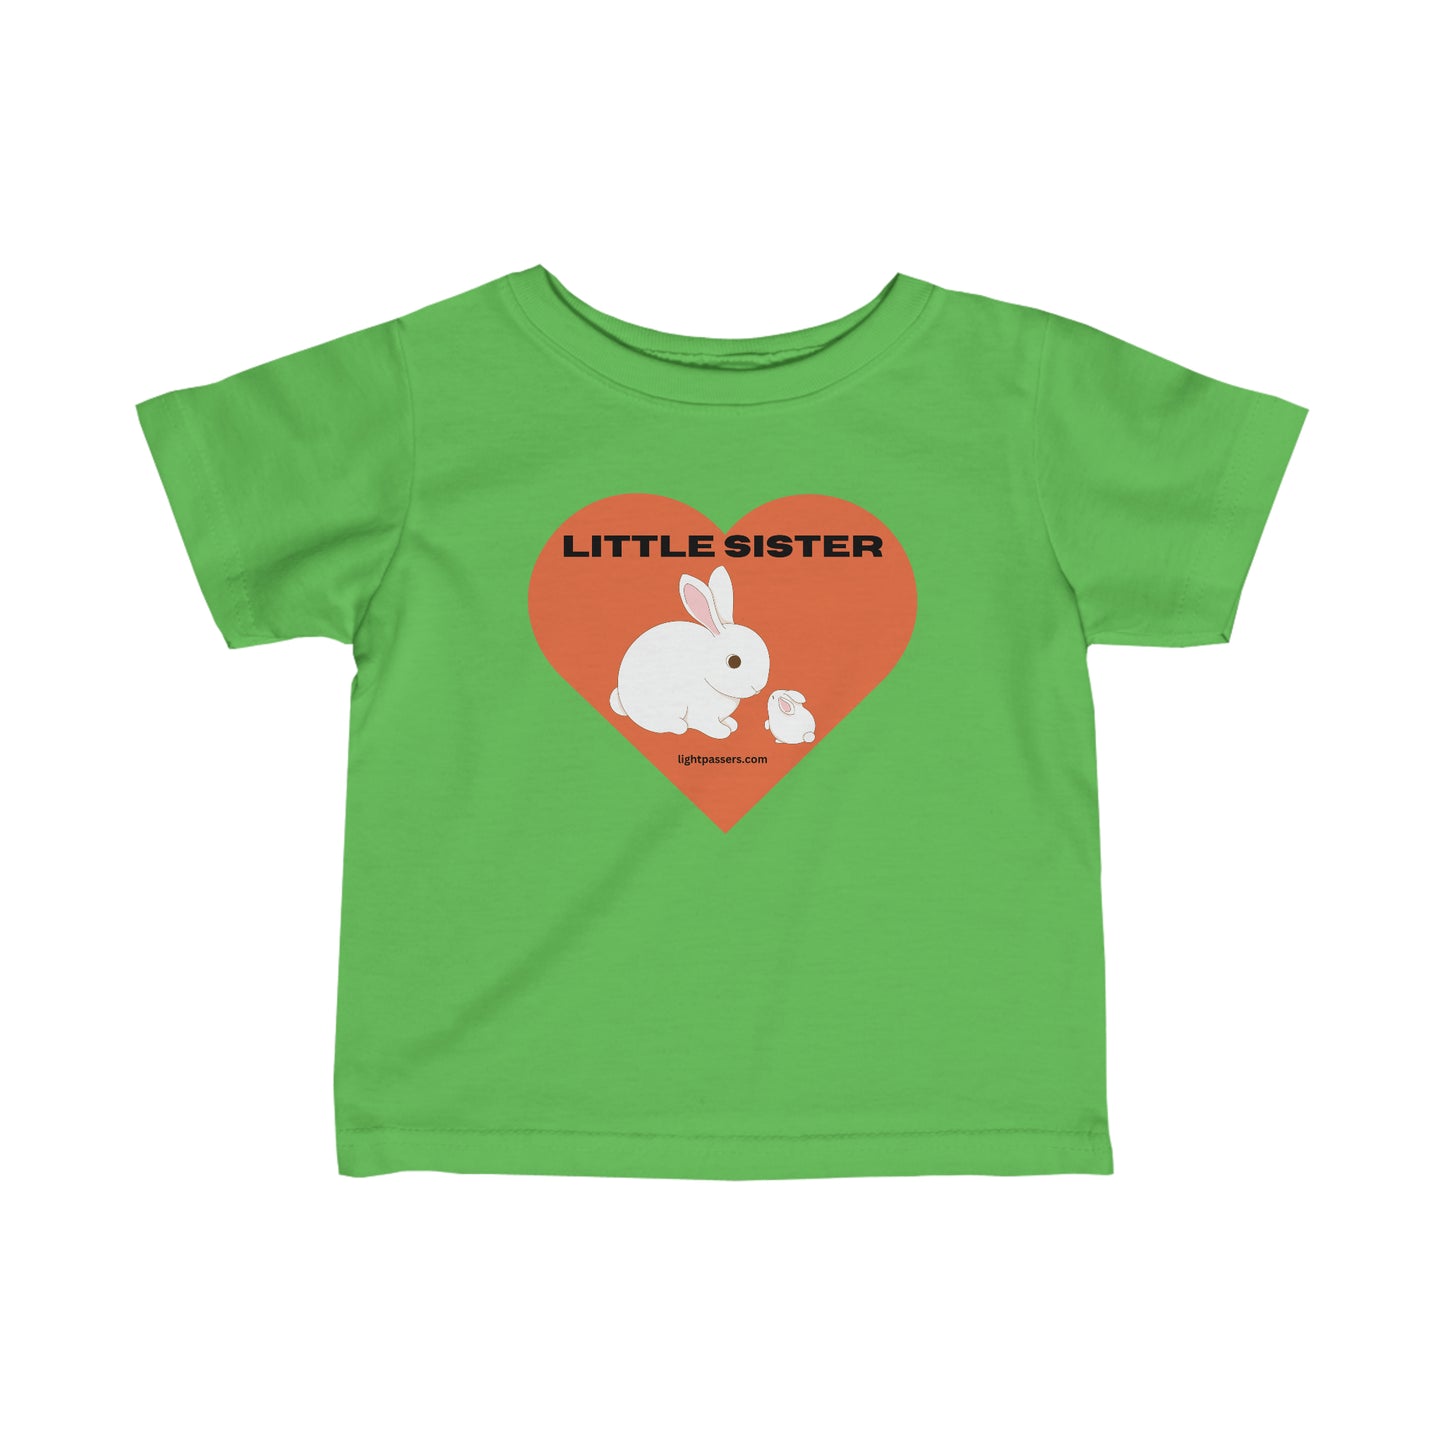 Light Passers Marketplace LIttle Sister Baby Infant Fine Jersey T-shirts Simple Messages, Mental Health